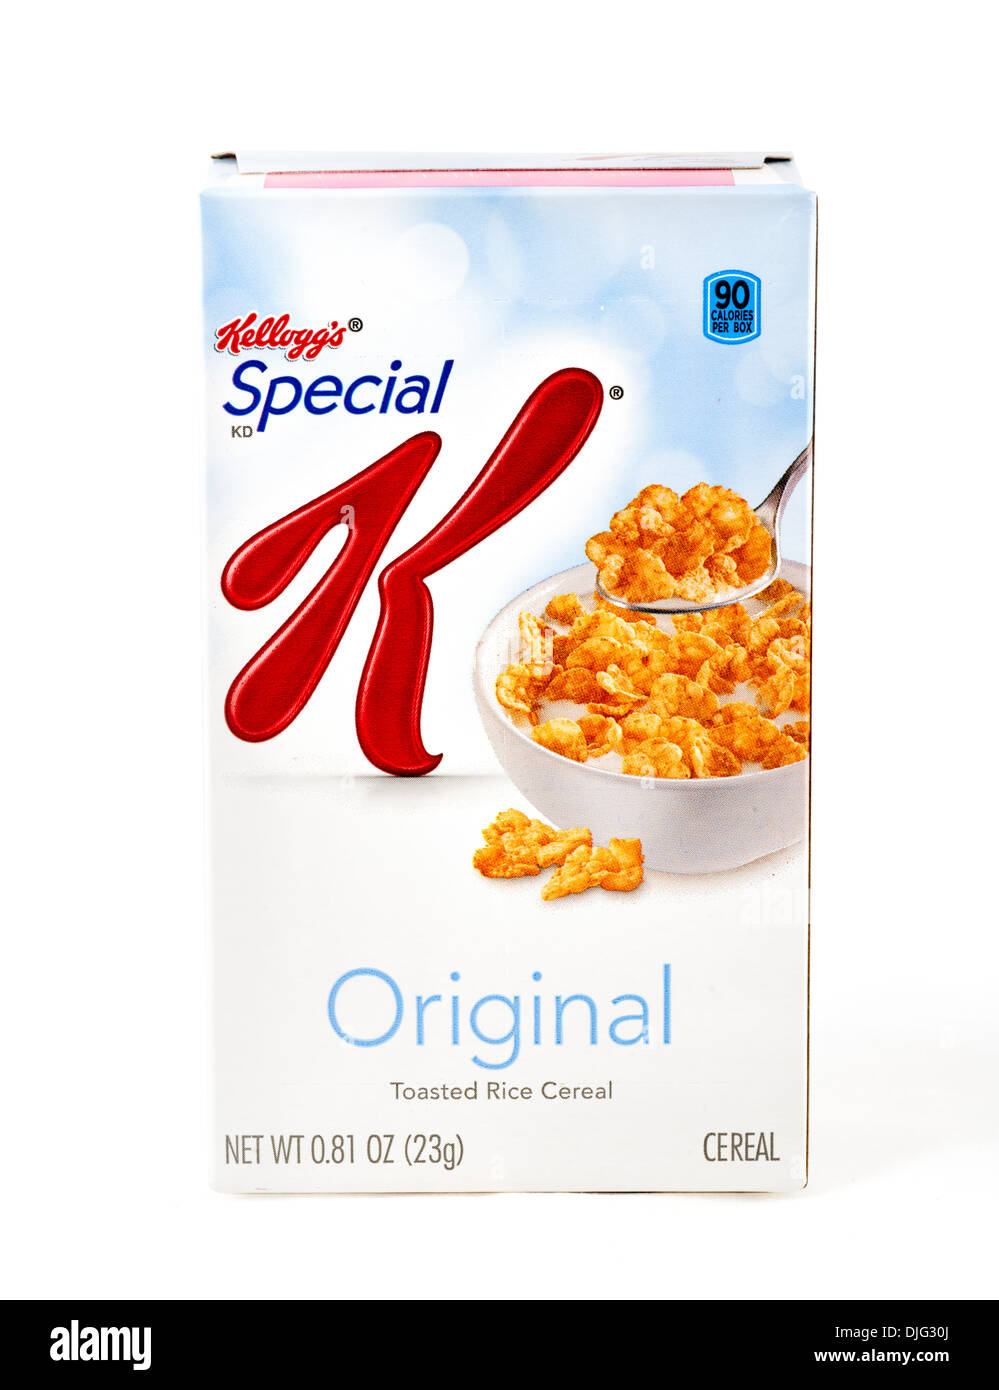 Small packet of Kellogg's Special K breakfast cereal from a Variety Pack, USA Stock Photo